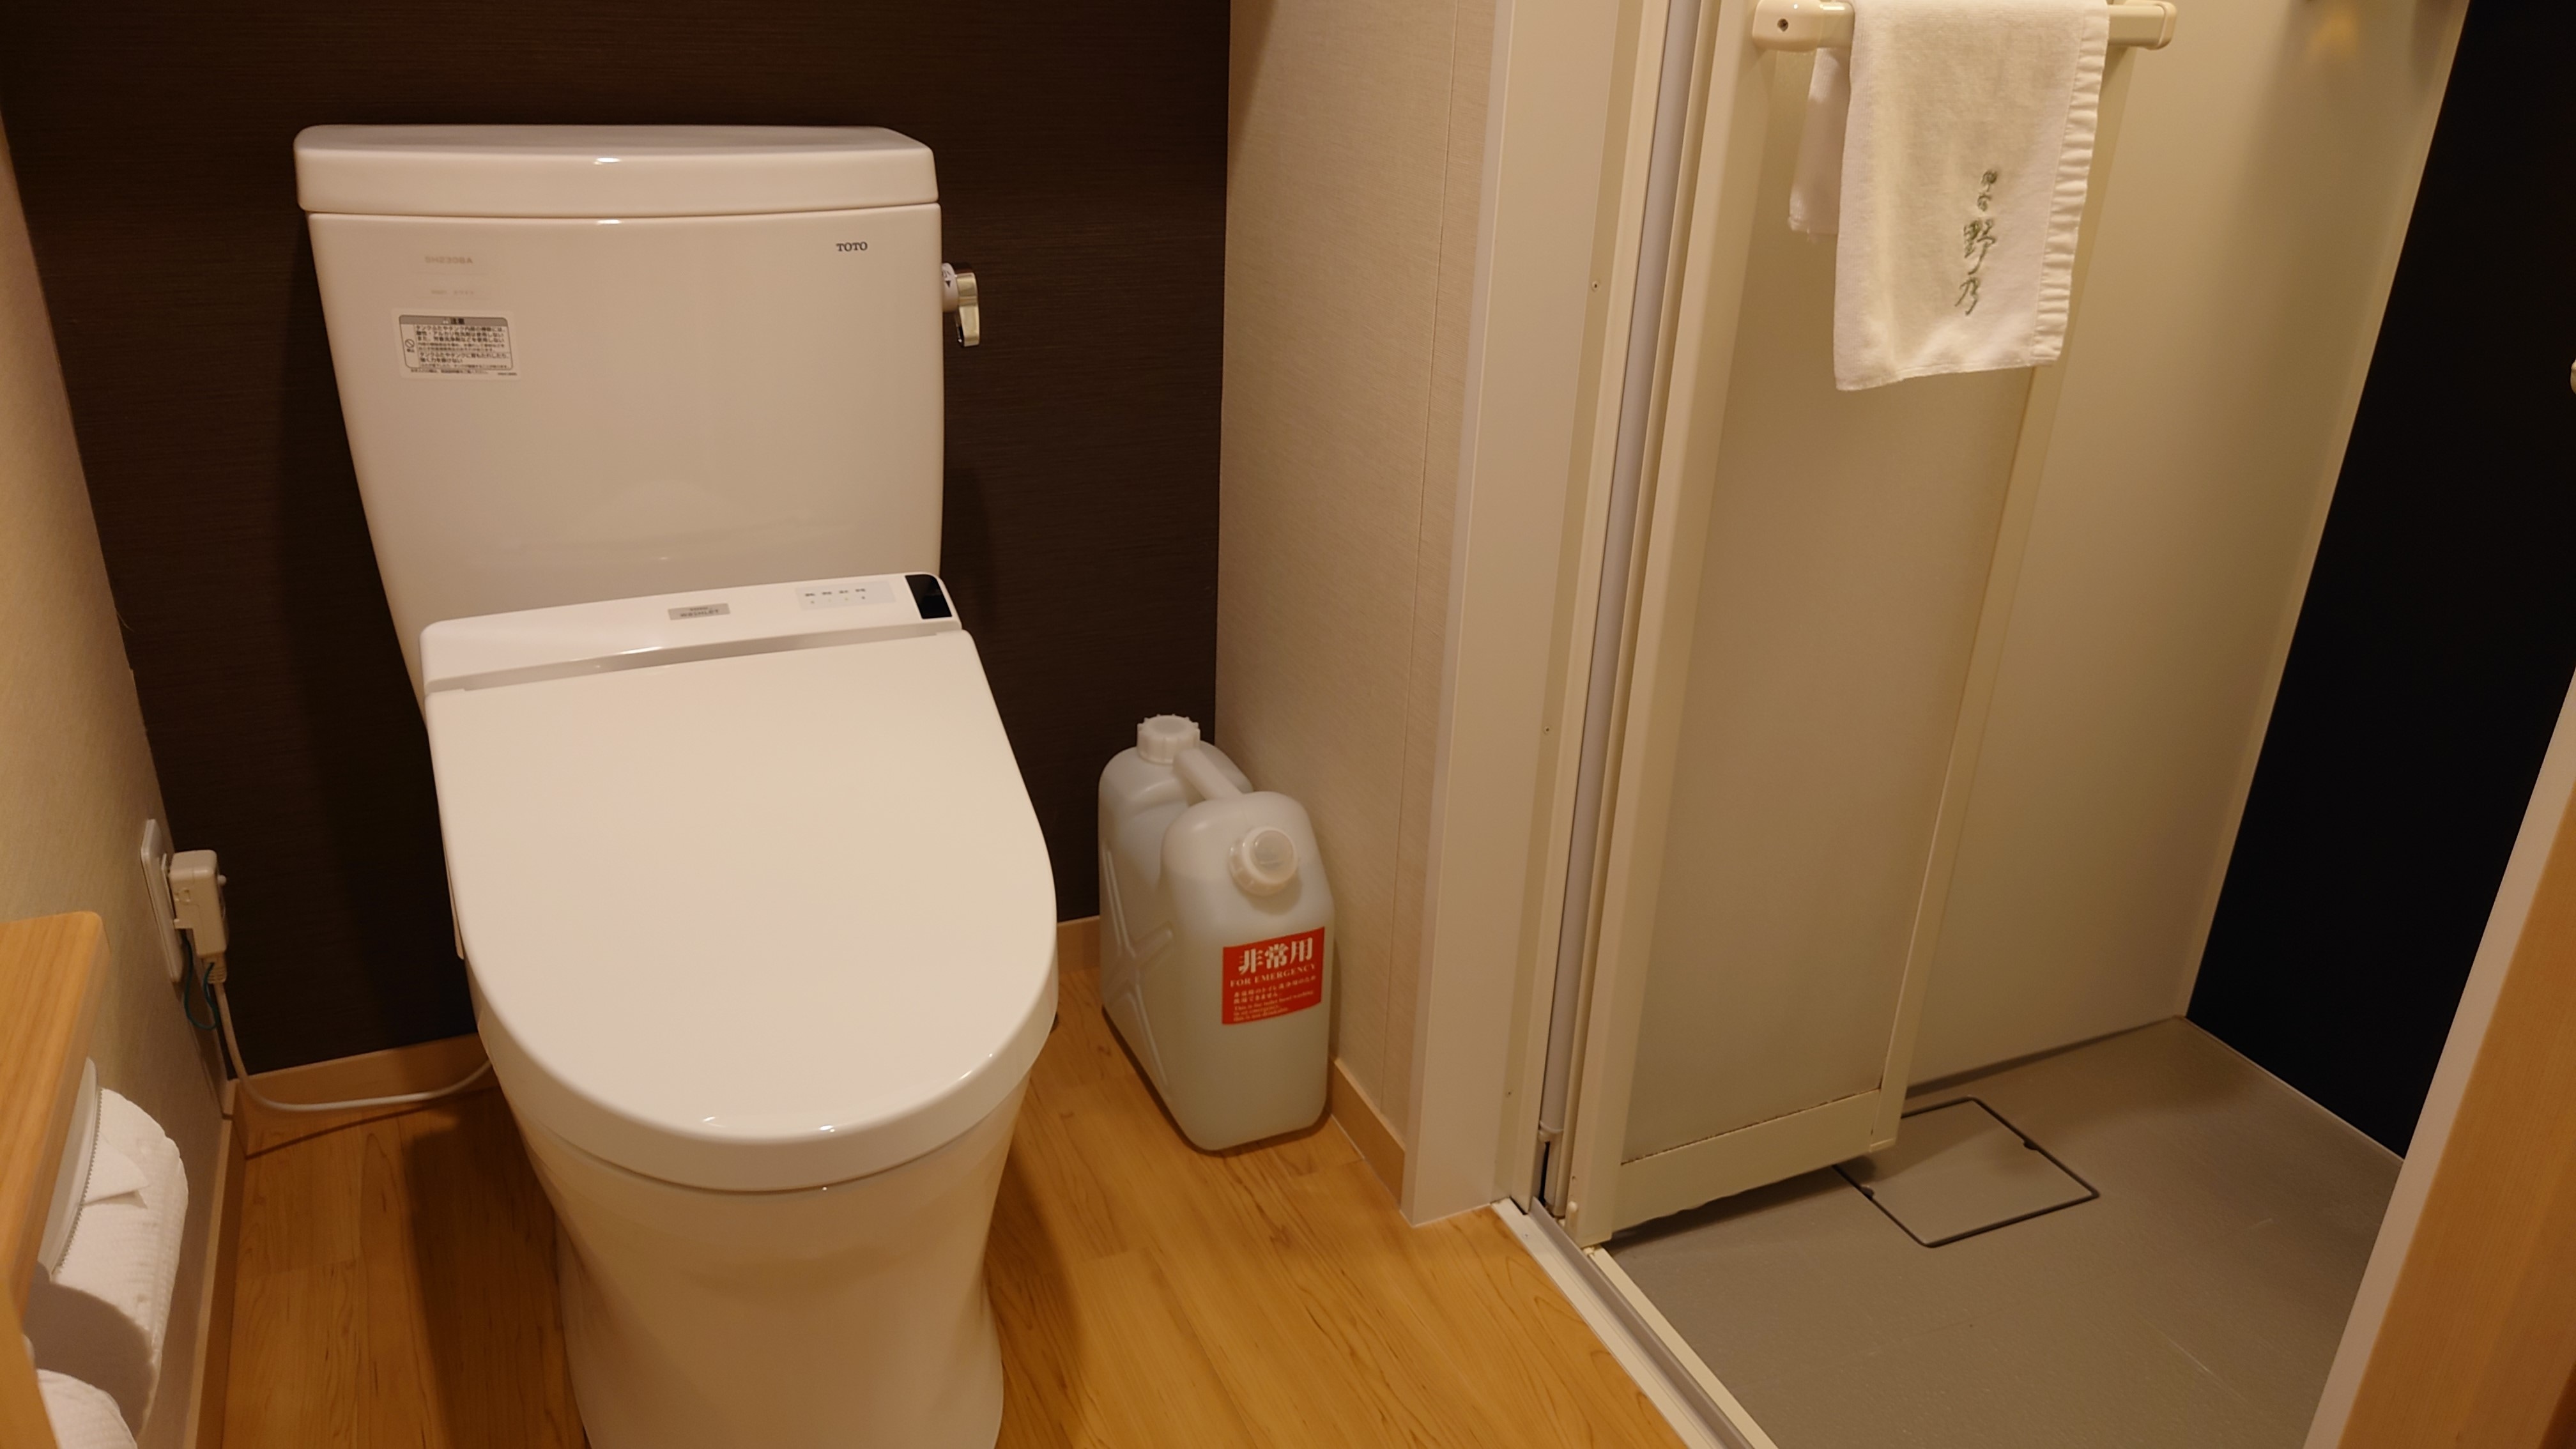 ■ Moderate double shower booth (16.5㎡ 140cm & times; 195cm & times; 1 Serta bed guest room)